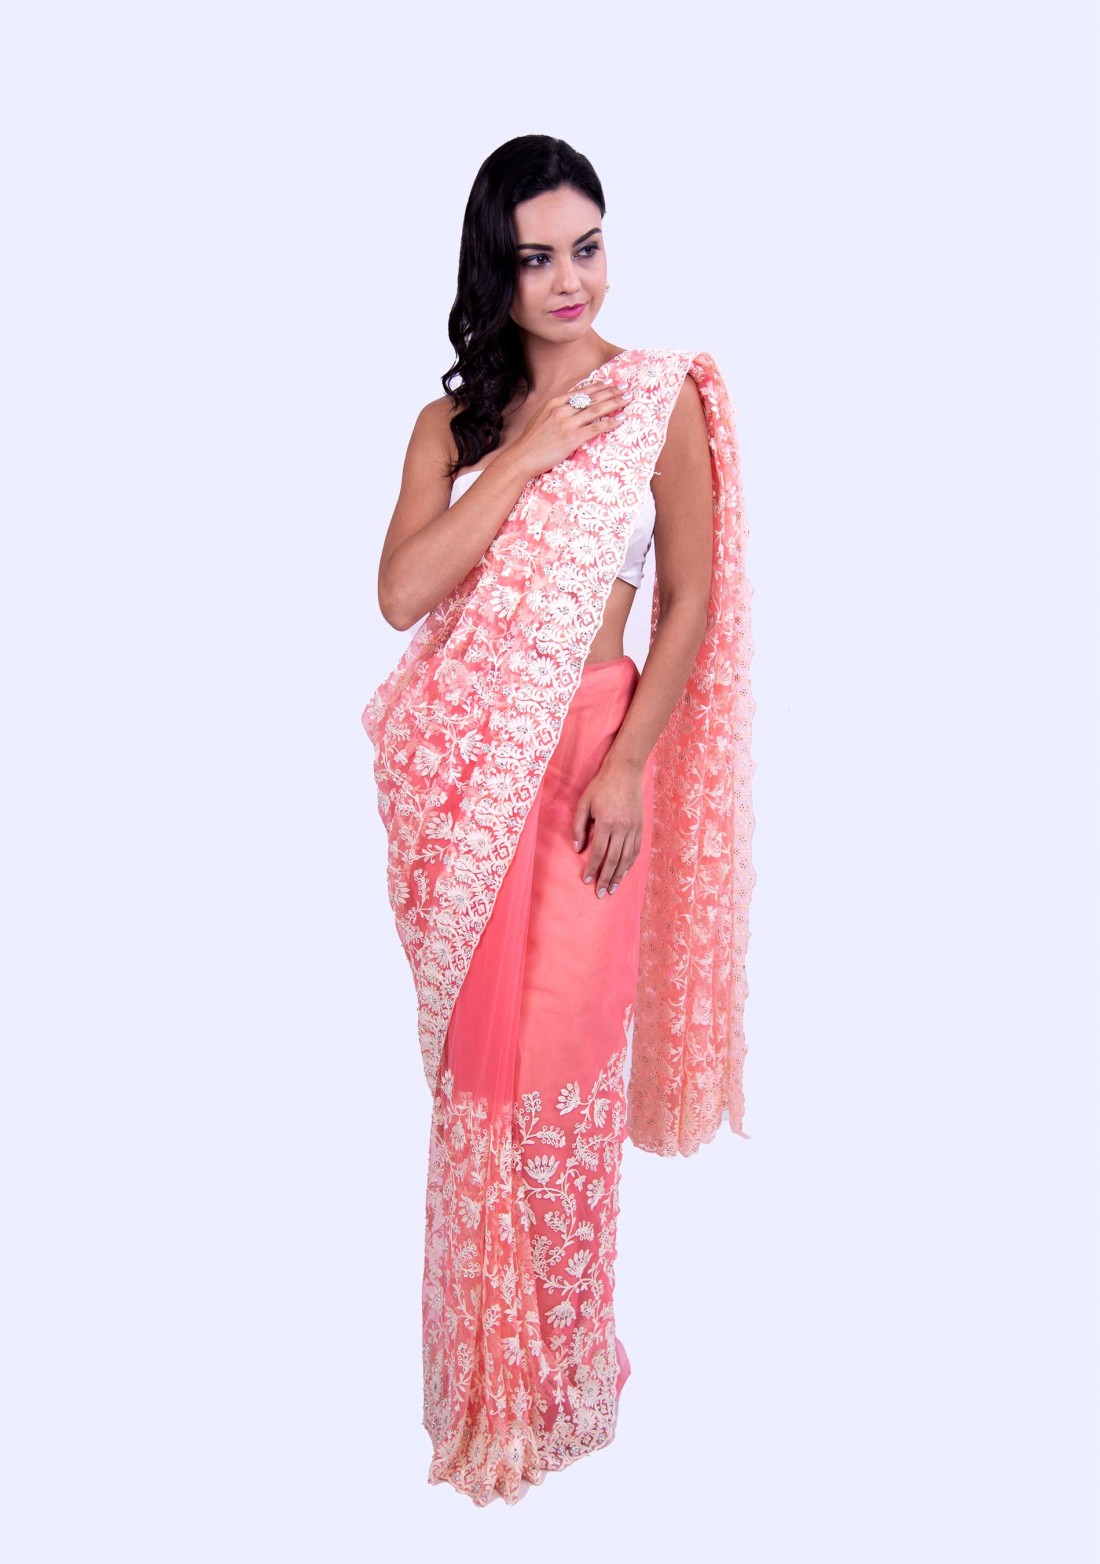 Heavy Thread Floral Embroidered Pink Net Saree